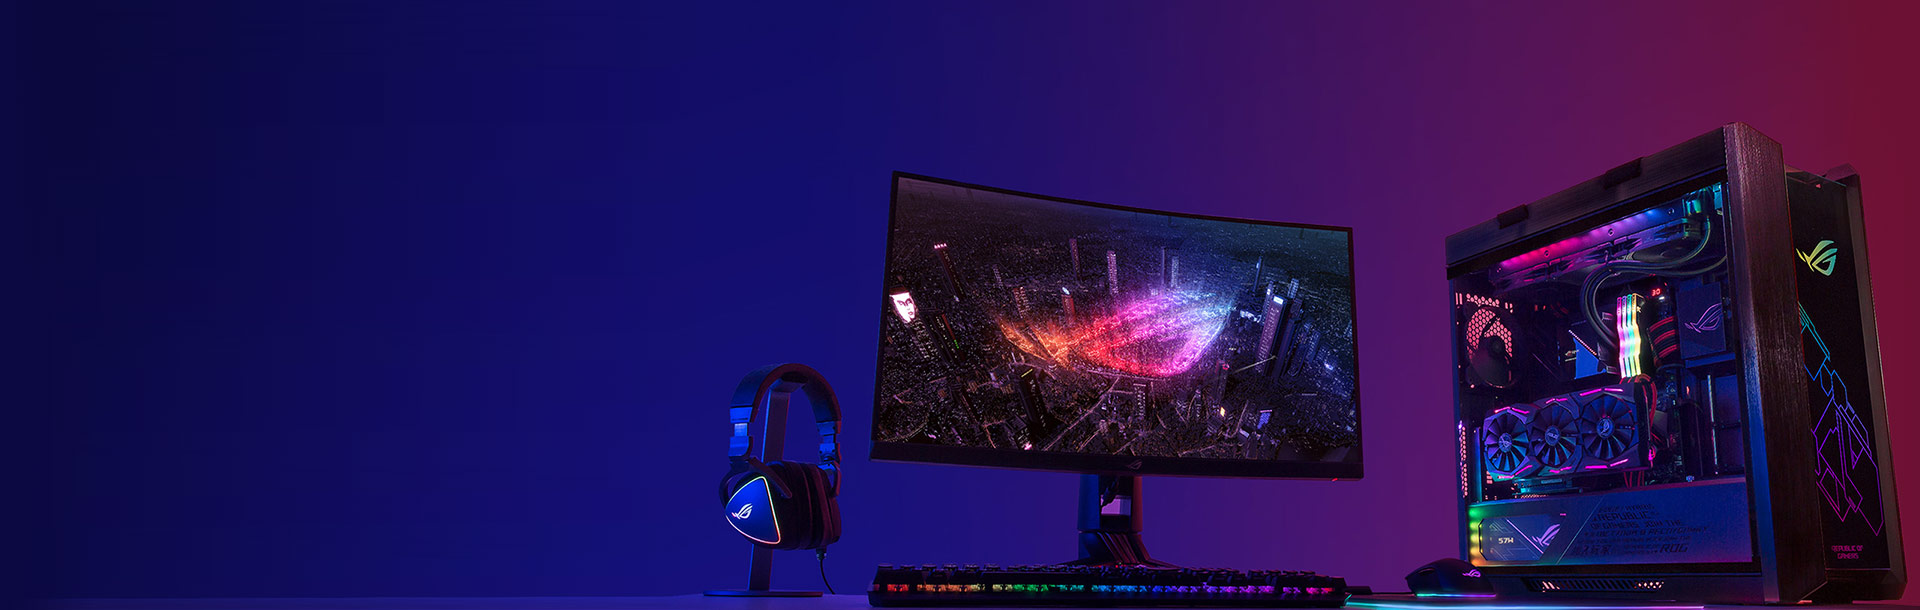 ROG Strix Z690-G Gaming WiFi features diverse ROG ecosystem